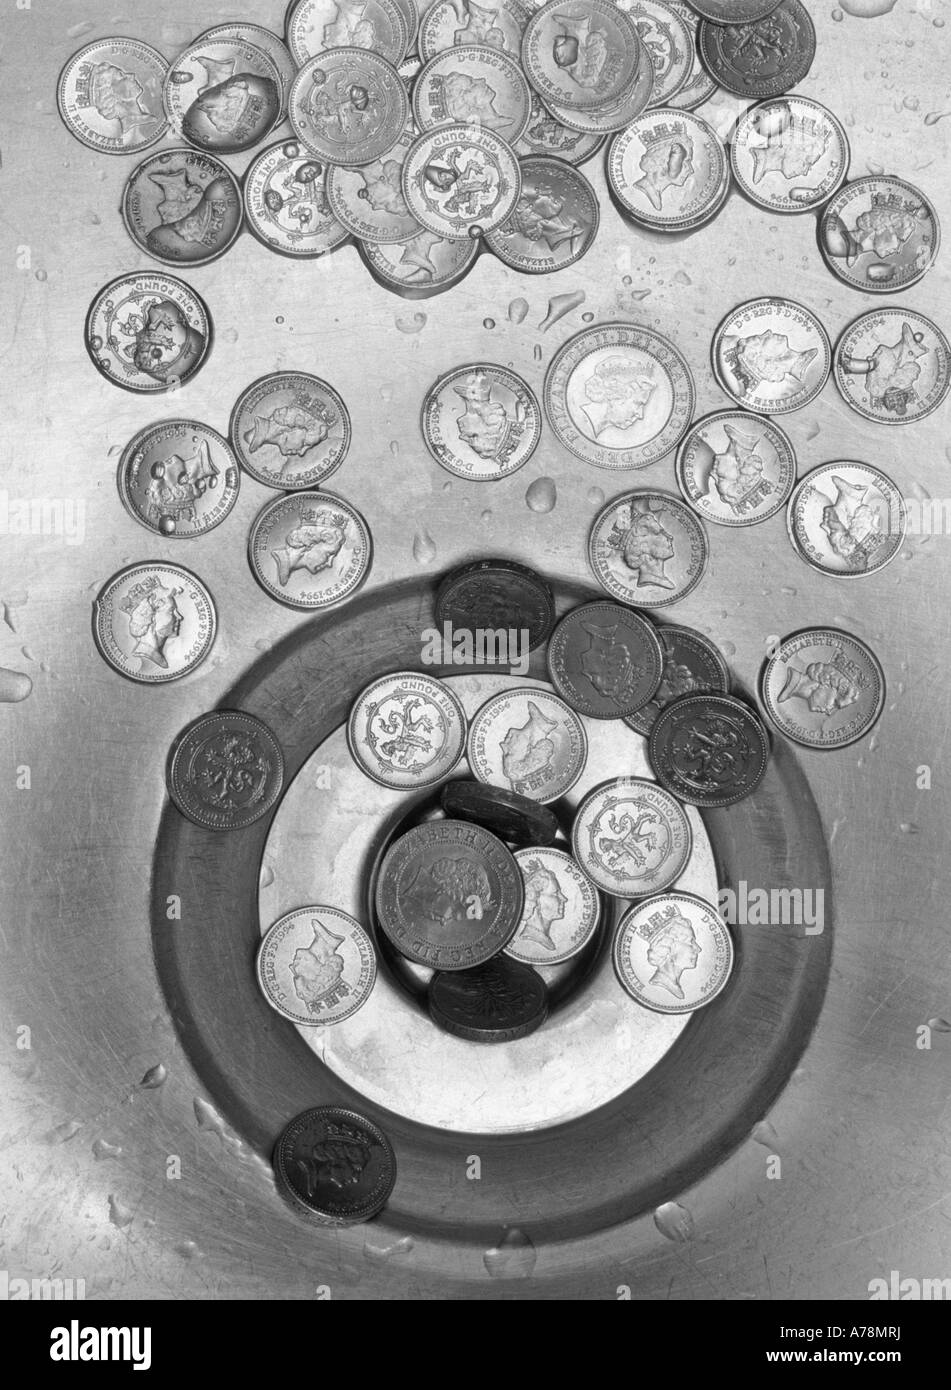 Money down the drain concept image with pound sterling coins around stainless steel sink bowl waste outlet Stock Photo